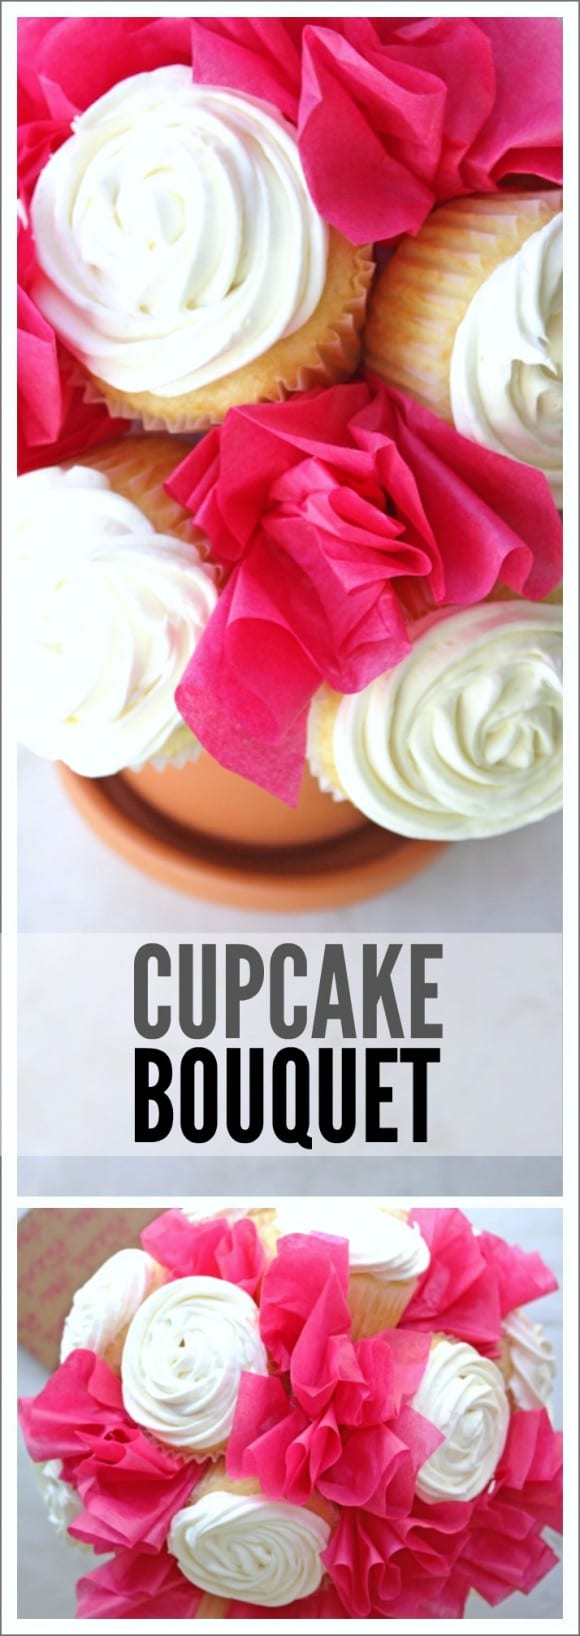 Learn to make this cupcake bouquet. It's perfect as a get well gift or party dessert! |CatchMyParty.com